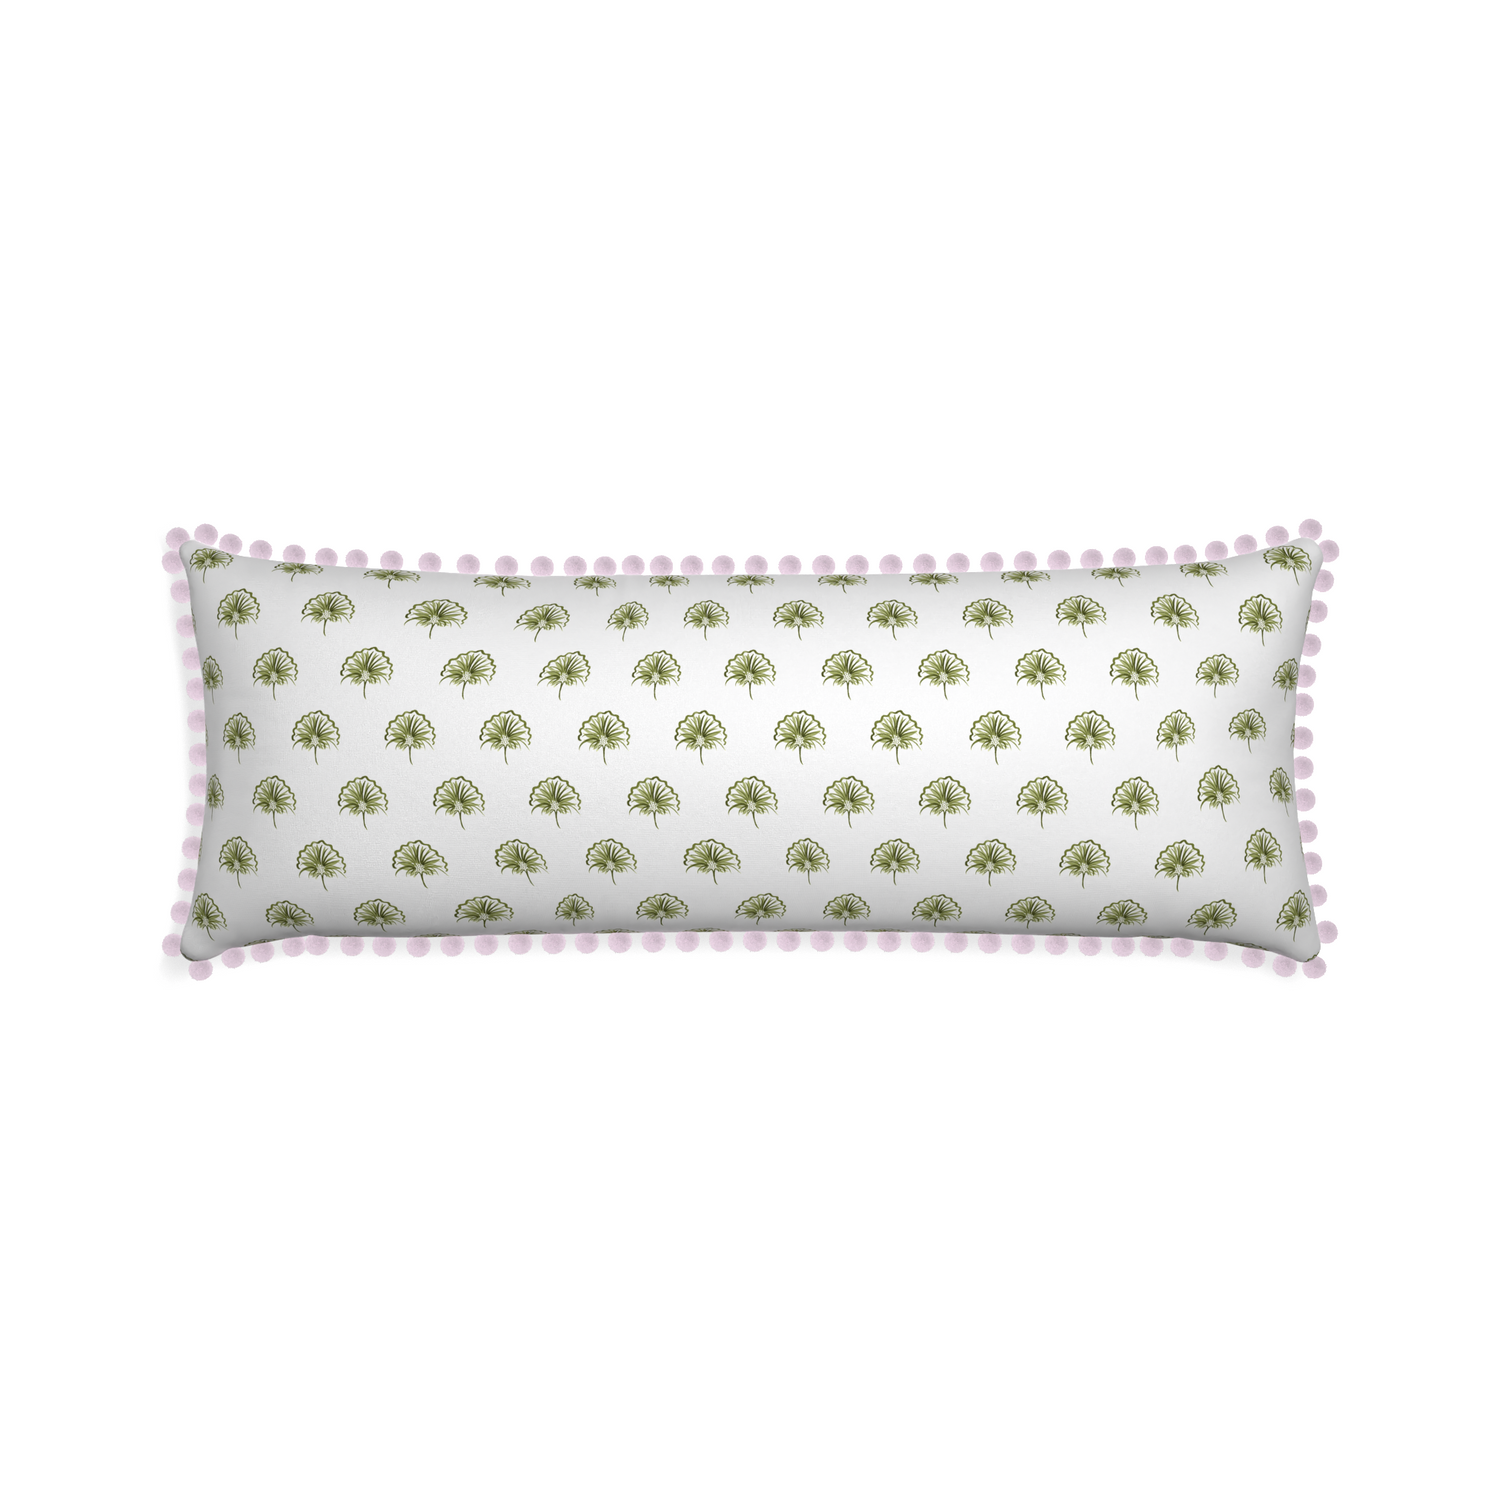 Xl-lumbar penelope moss custom green floralpillow with l on white background